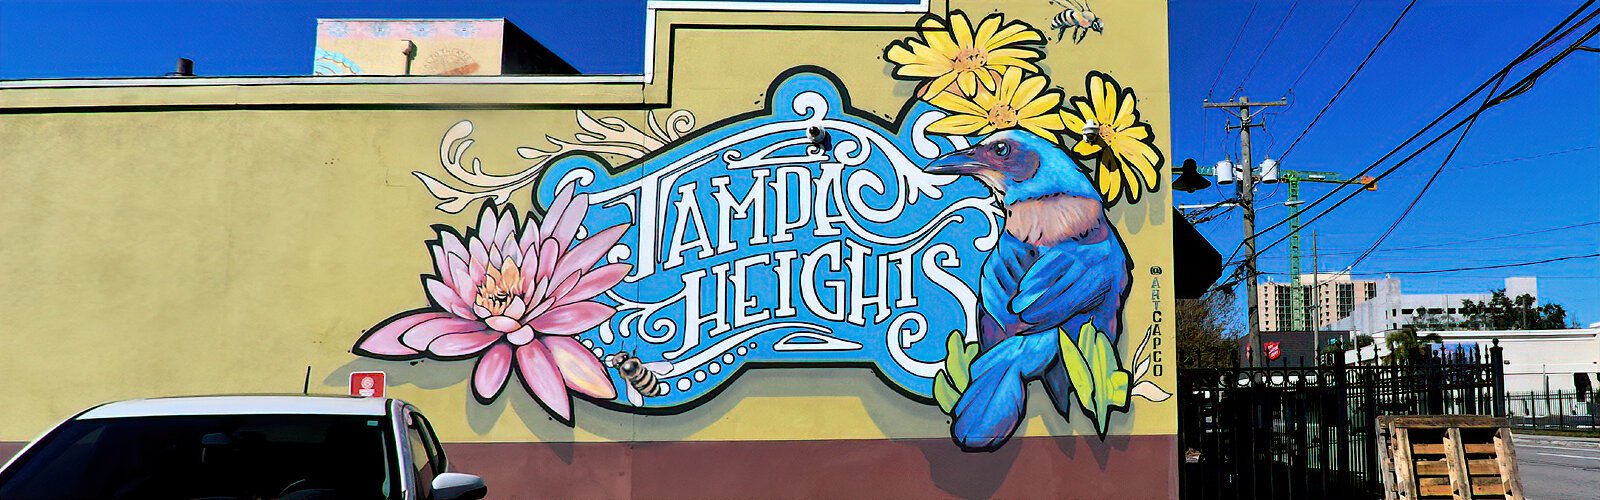 On almost every corner, Tampa Heights abounds with amazing street art like this mural by Artcapco.